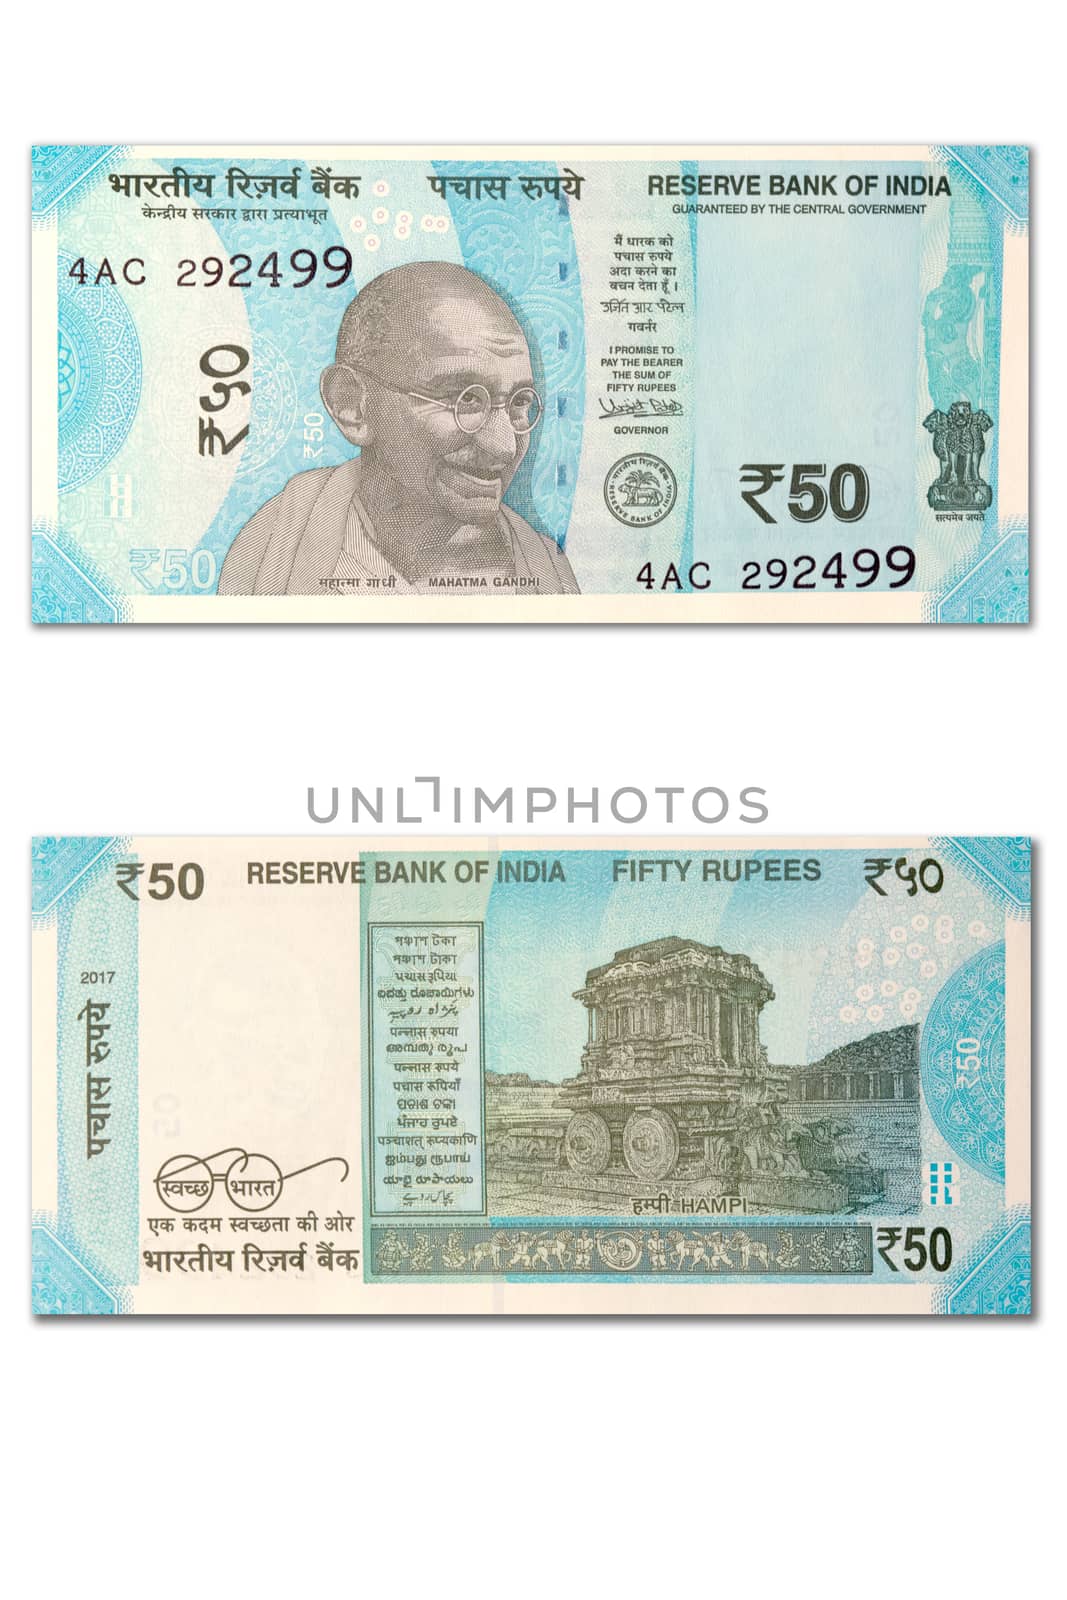 New Indian 50 rupees front and back view on isolted white background by lakshmiprasad.maski@gmai.com